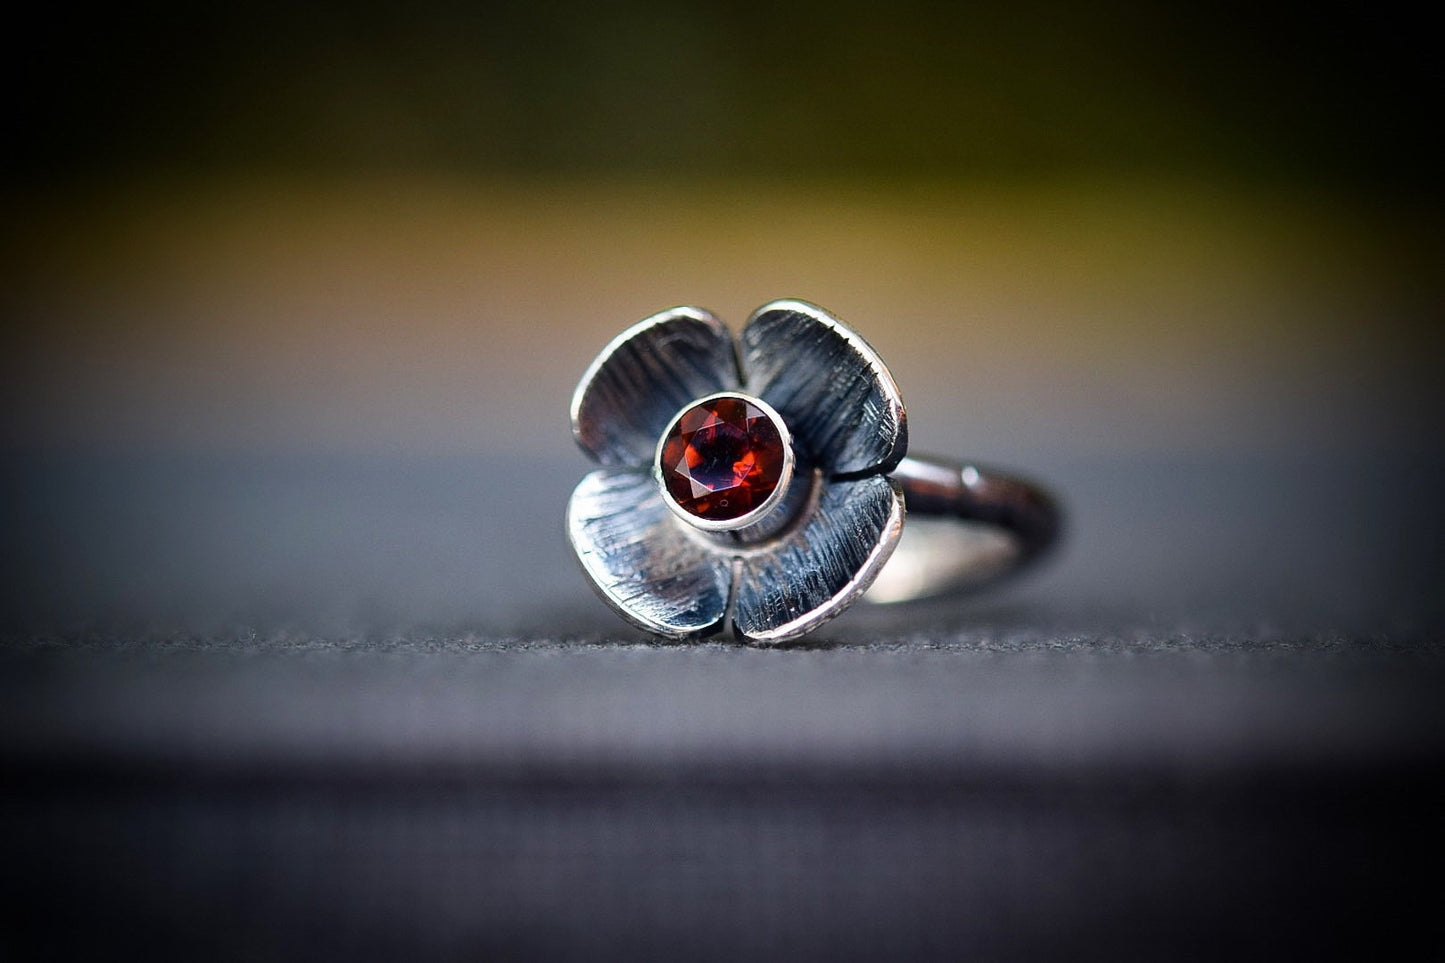 Oxidized sterling silver flower ring with red/ orange fire citrine in center of 4 petal textured flower.